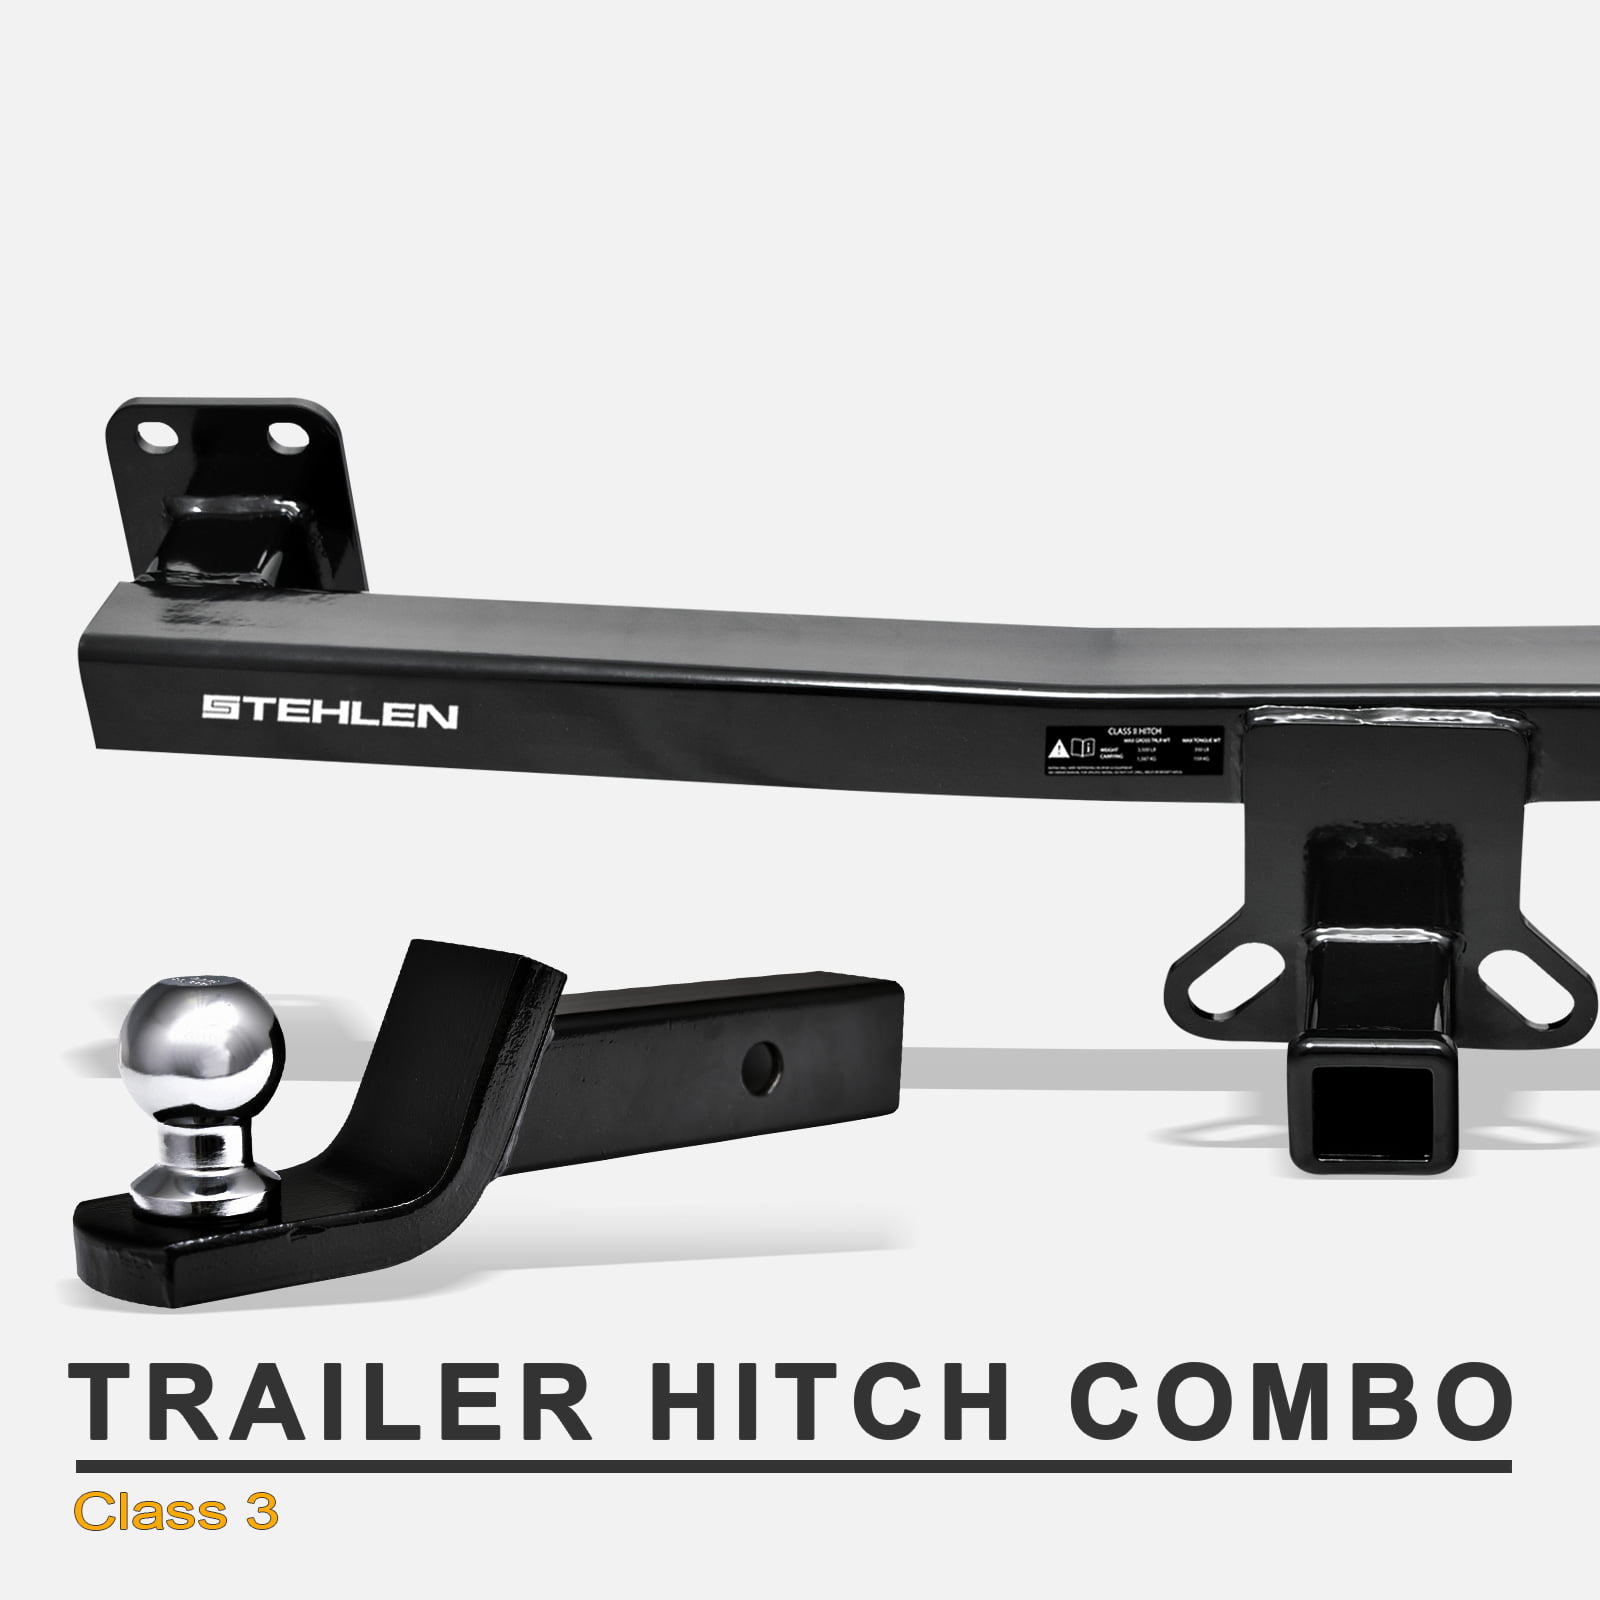 Stehlen 733469492528 Class 3 Trailer Hitch Receiver 2" with Loaded Ball 2010 Vw Touareg Trailer Hitch